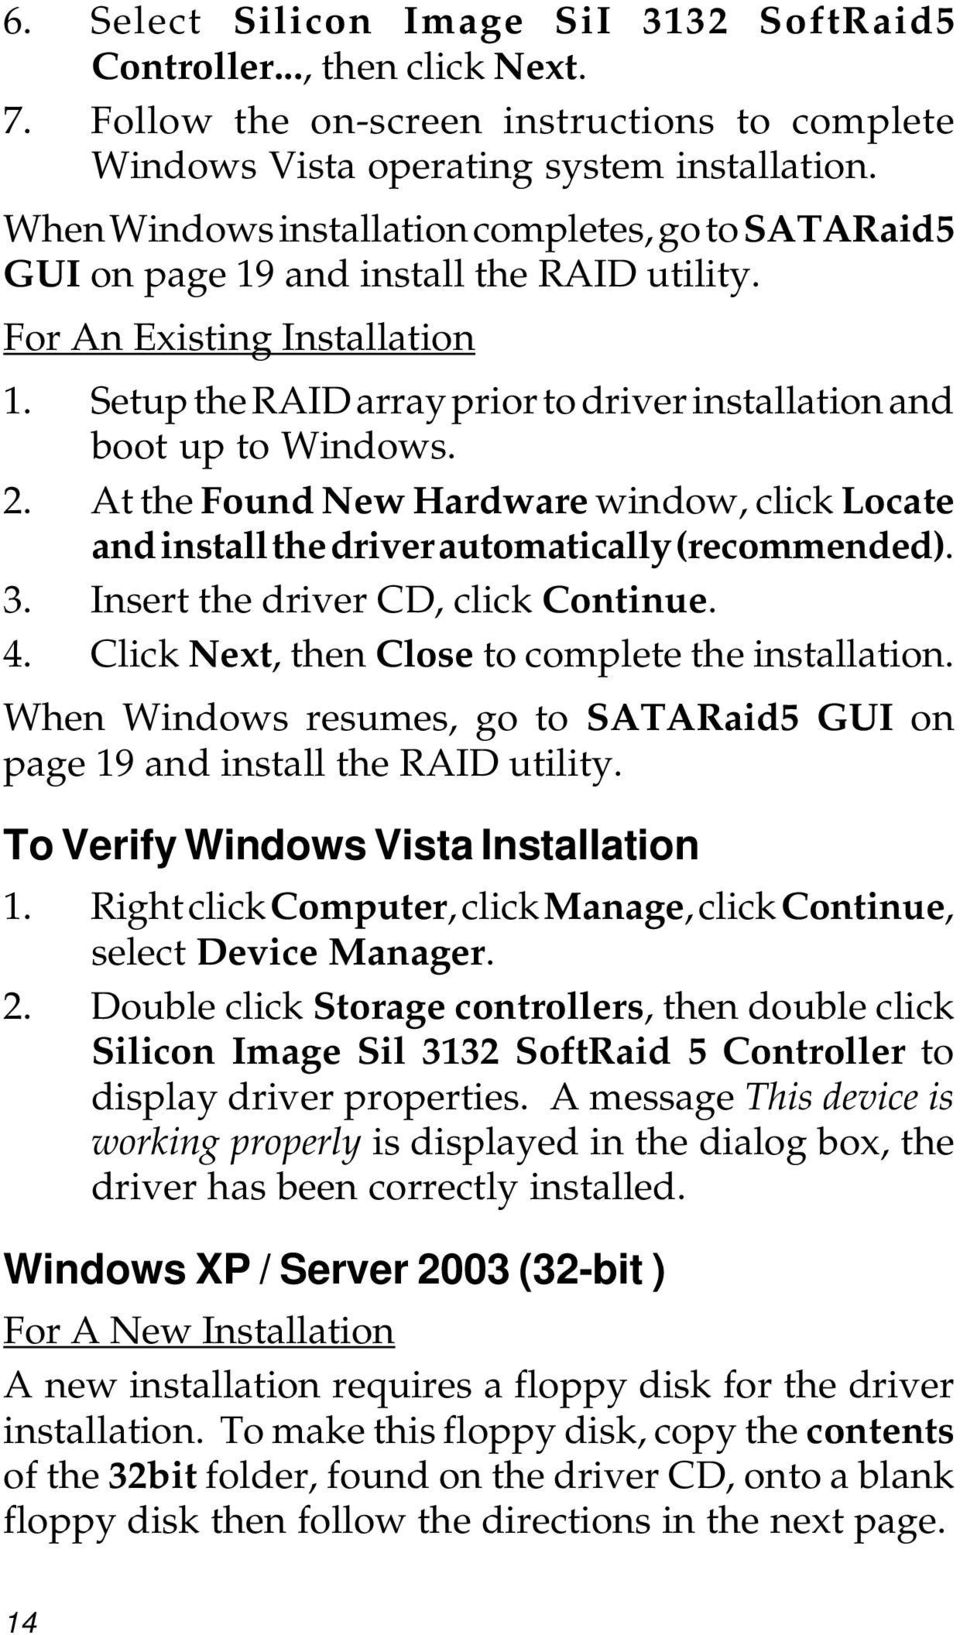 Setup the RAID array prior to driver installation and boot up to Windows. 2. At the Found New Hardware window, click Locate and install the driver automatically (recommended). 3.